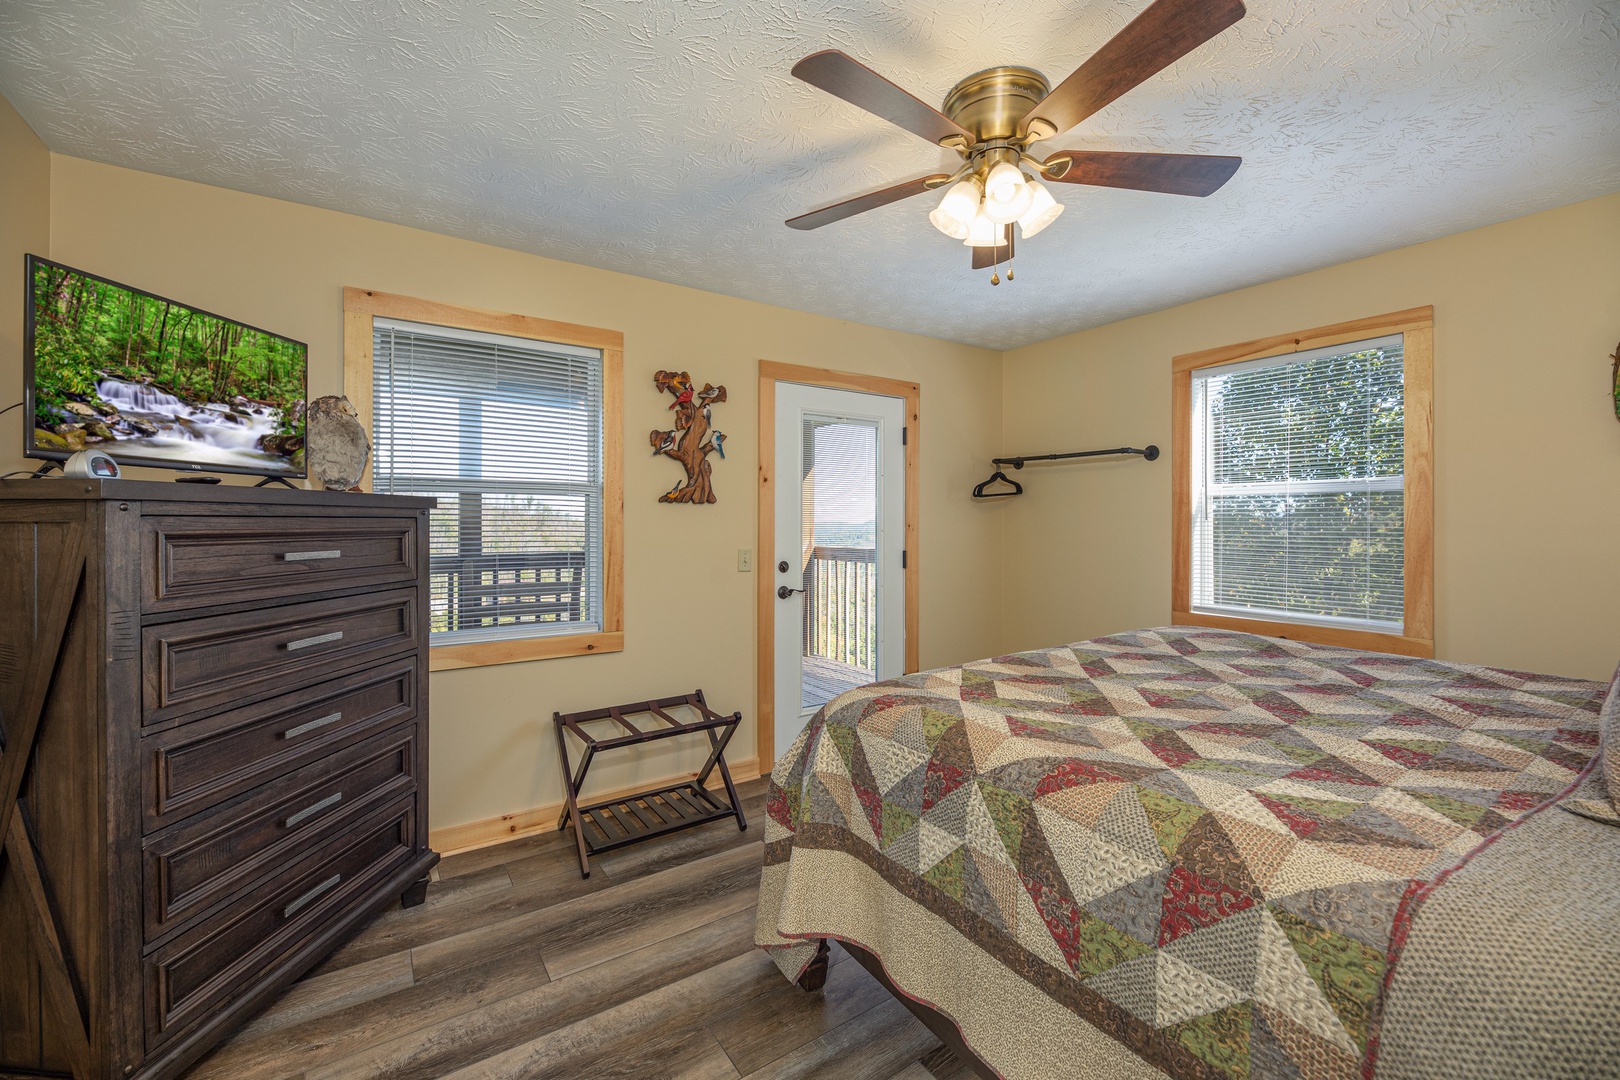 Dresser, TV, and deck access in a bedroom at Le Bear Chalet, a 7 bedroom cabin rental located in Gatlinburg